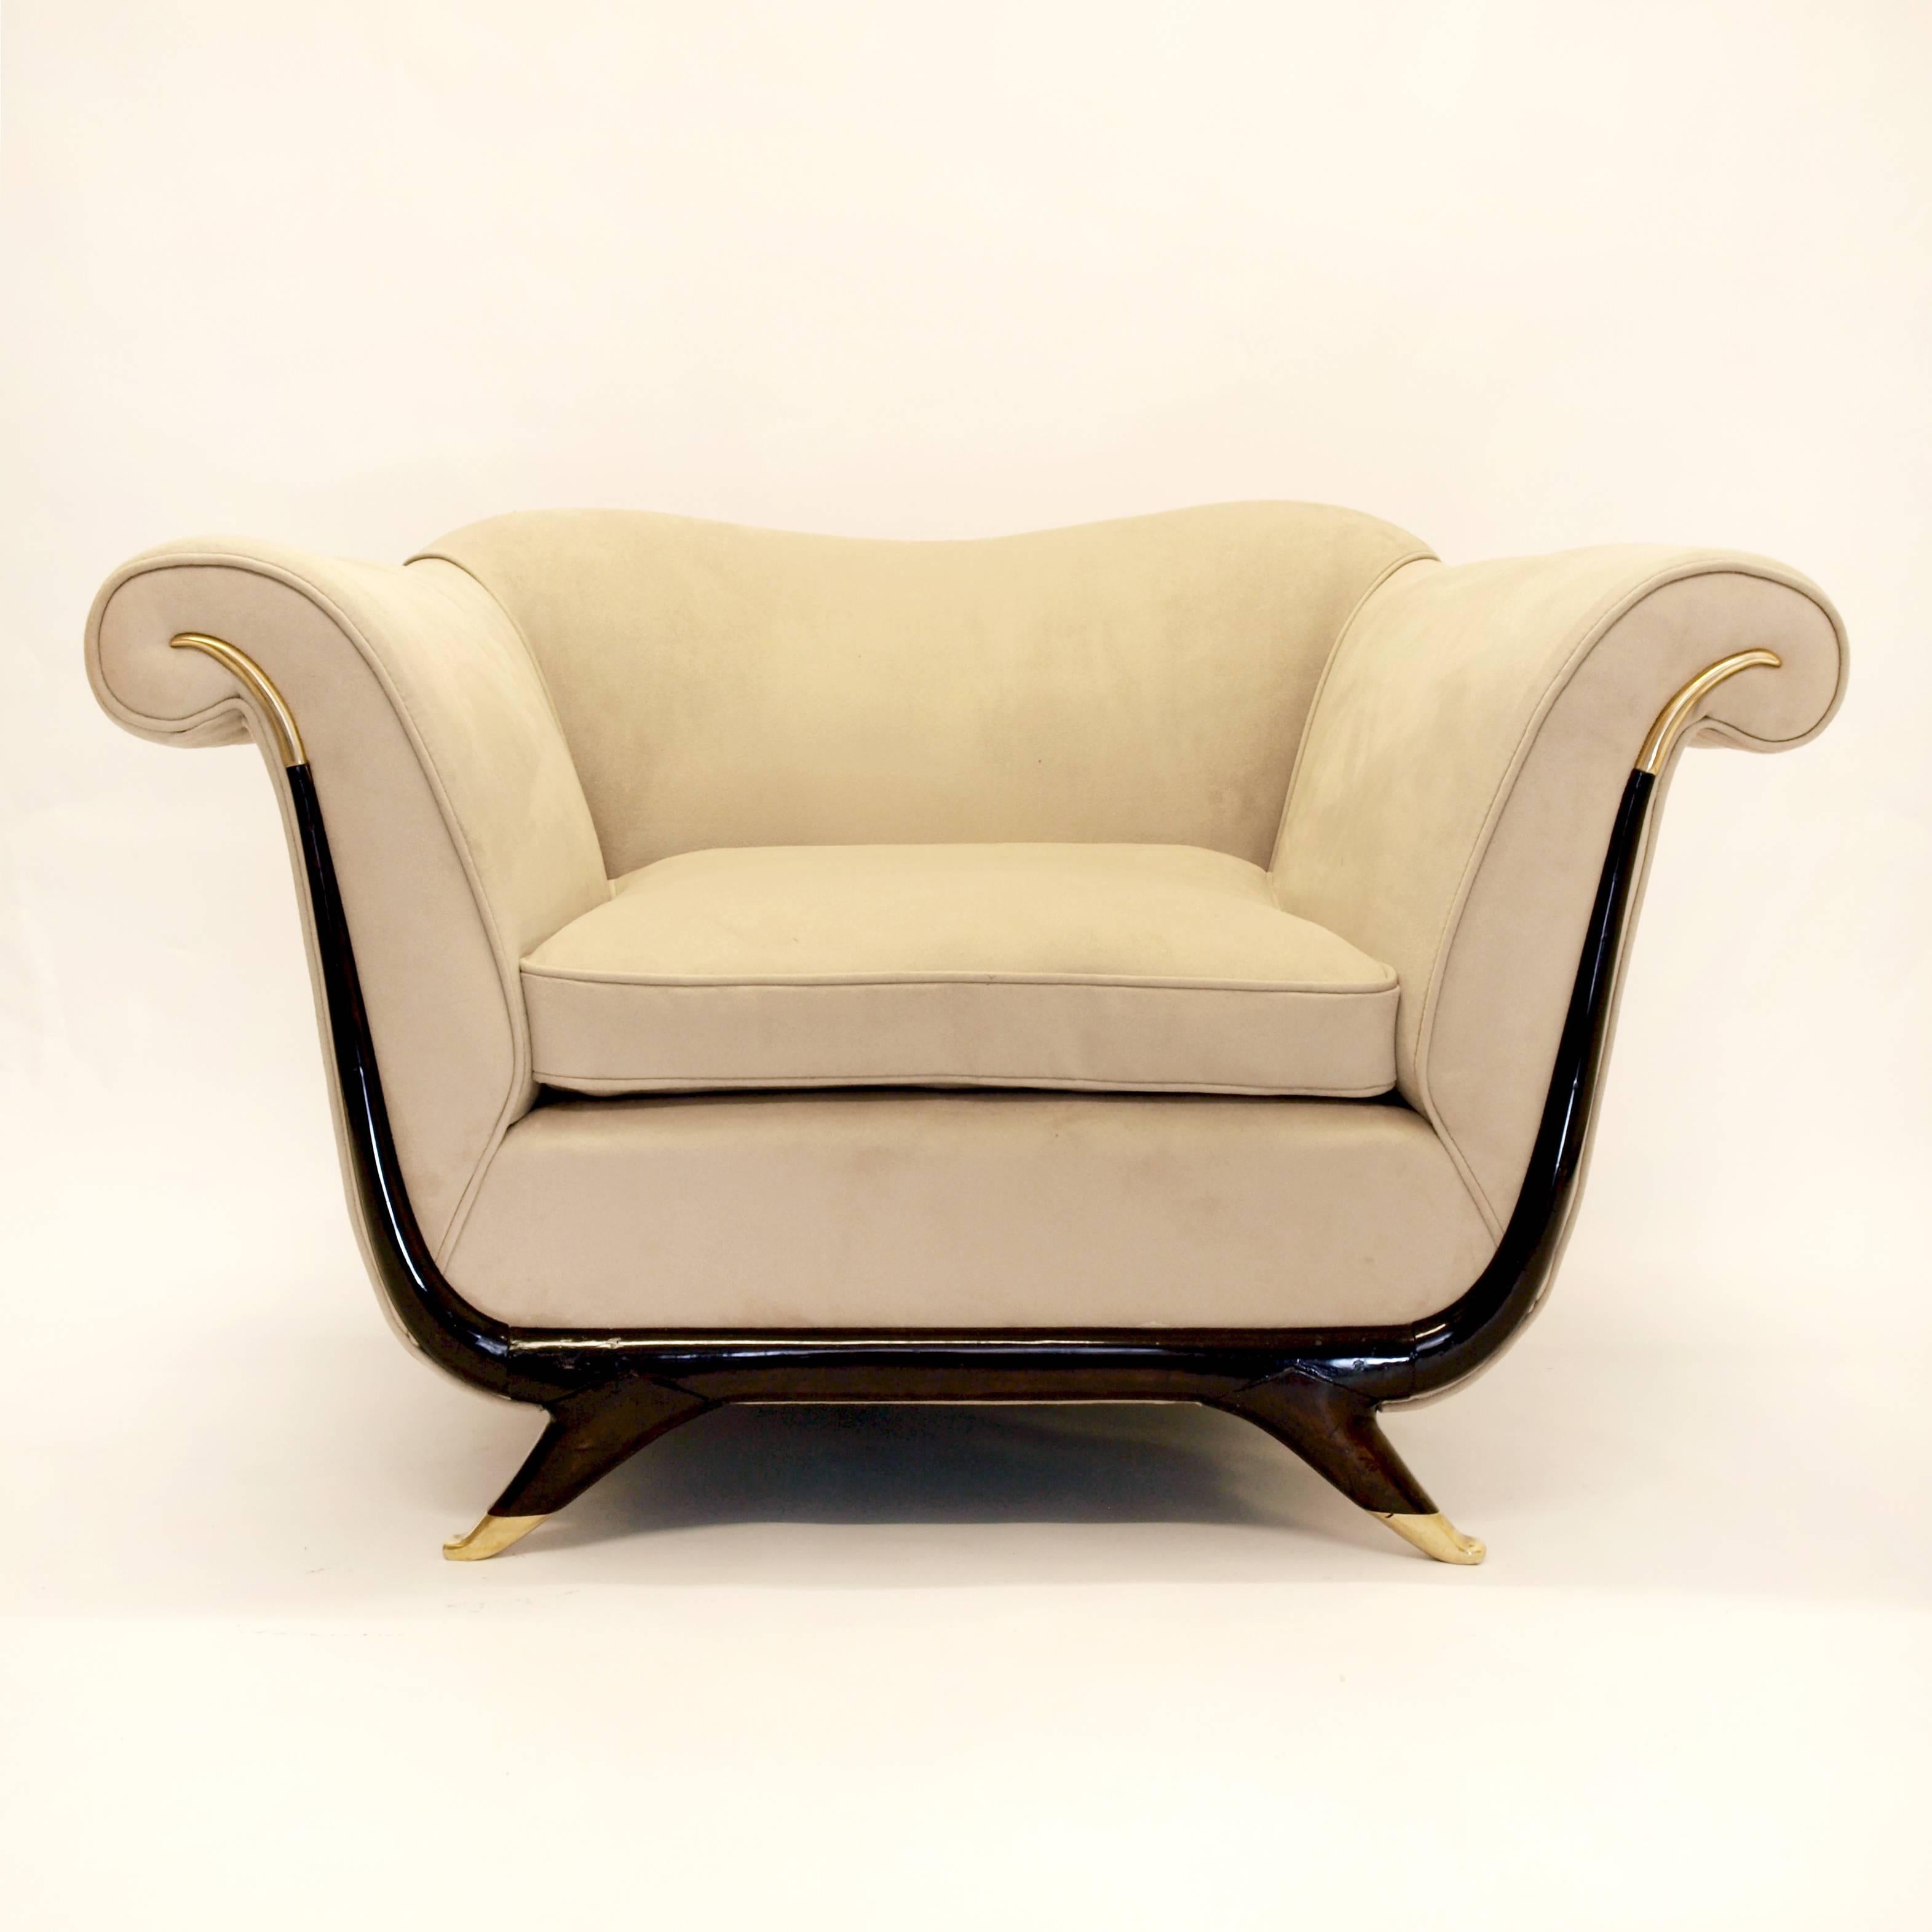 Italian Pair of 1940s Armchairs Attributed to Guglielmo Ulrich